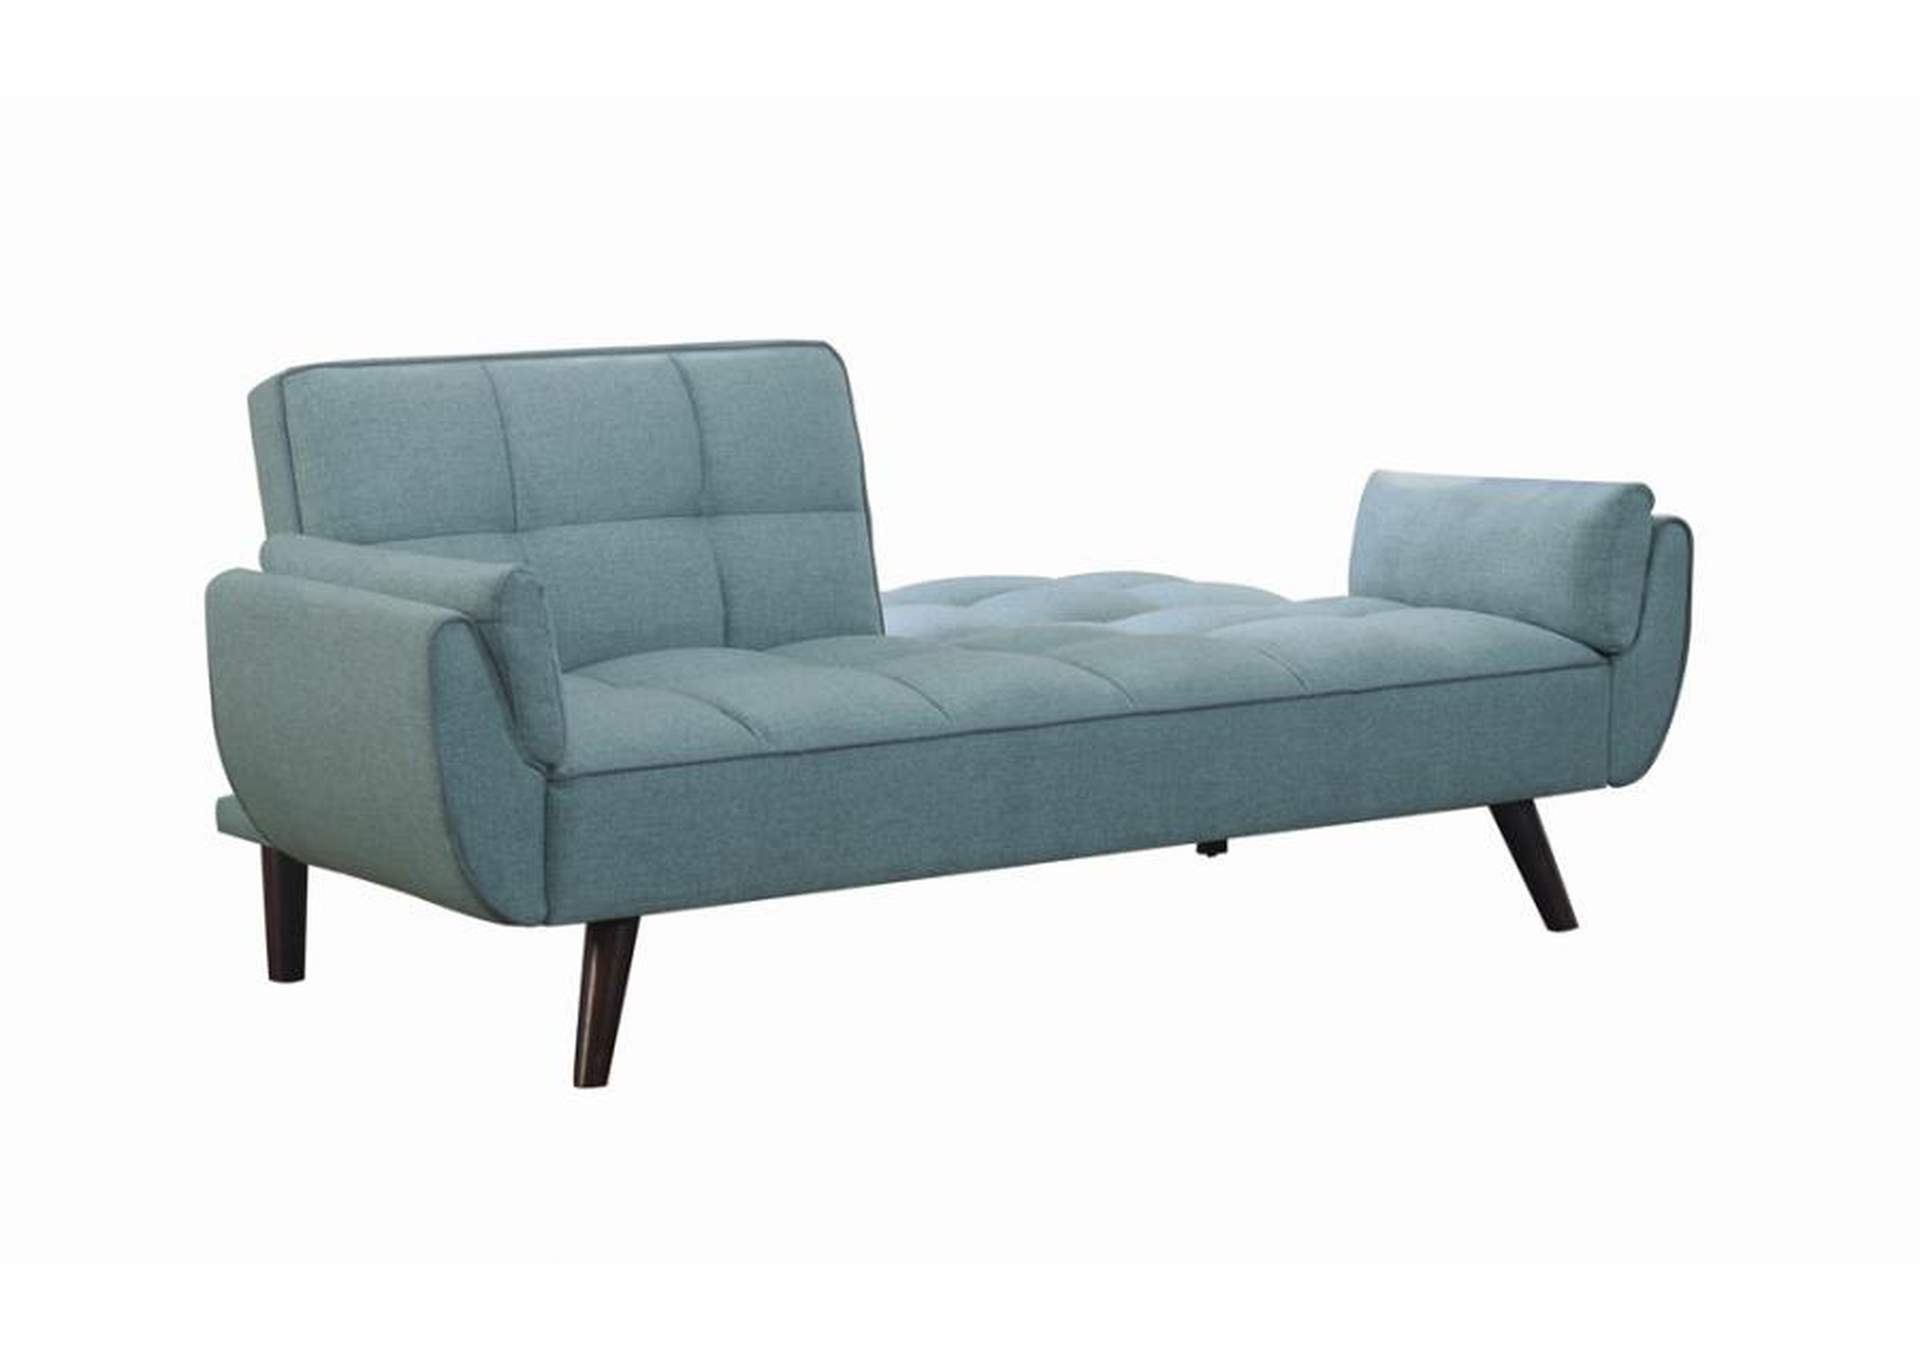 Caufield Biscuit-Tufted Sofa Bed Turquoise Blue,Coaster Furniture